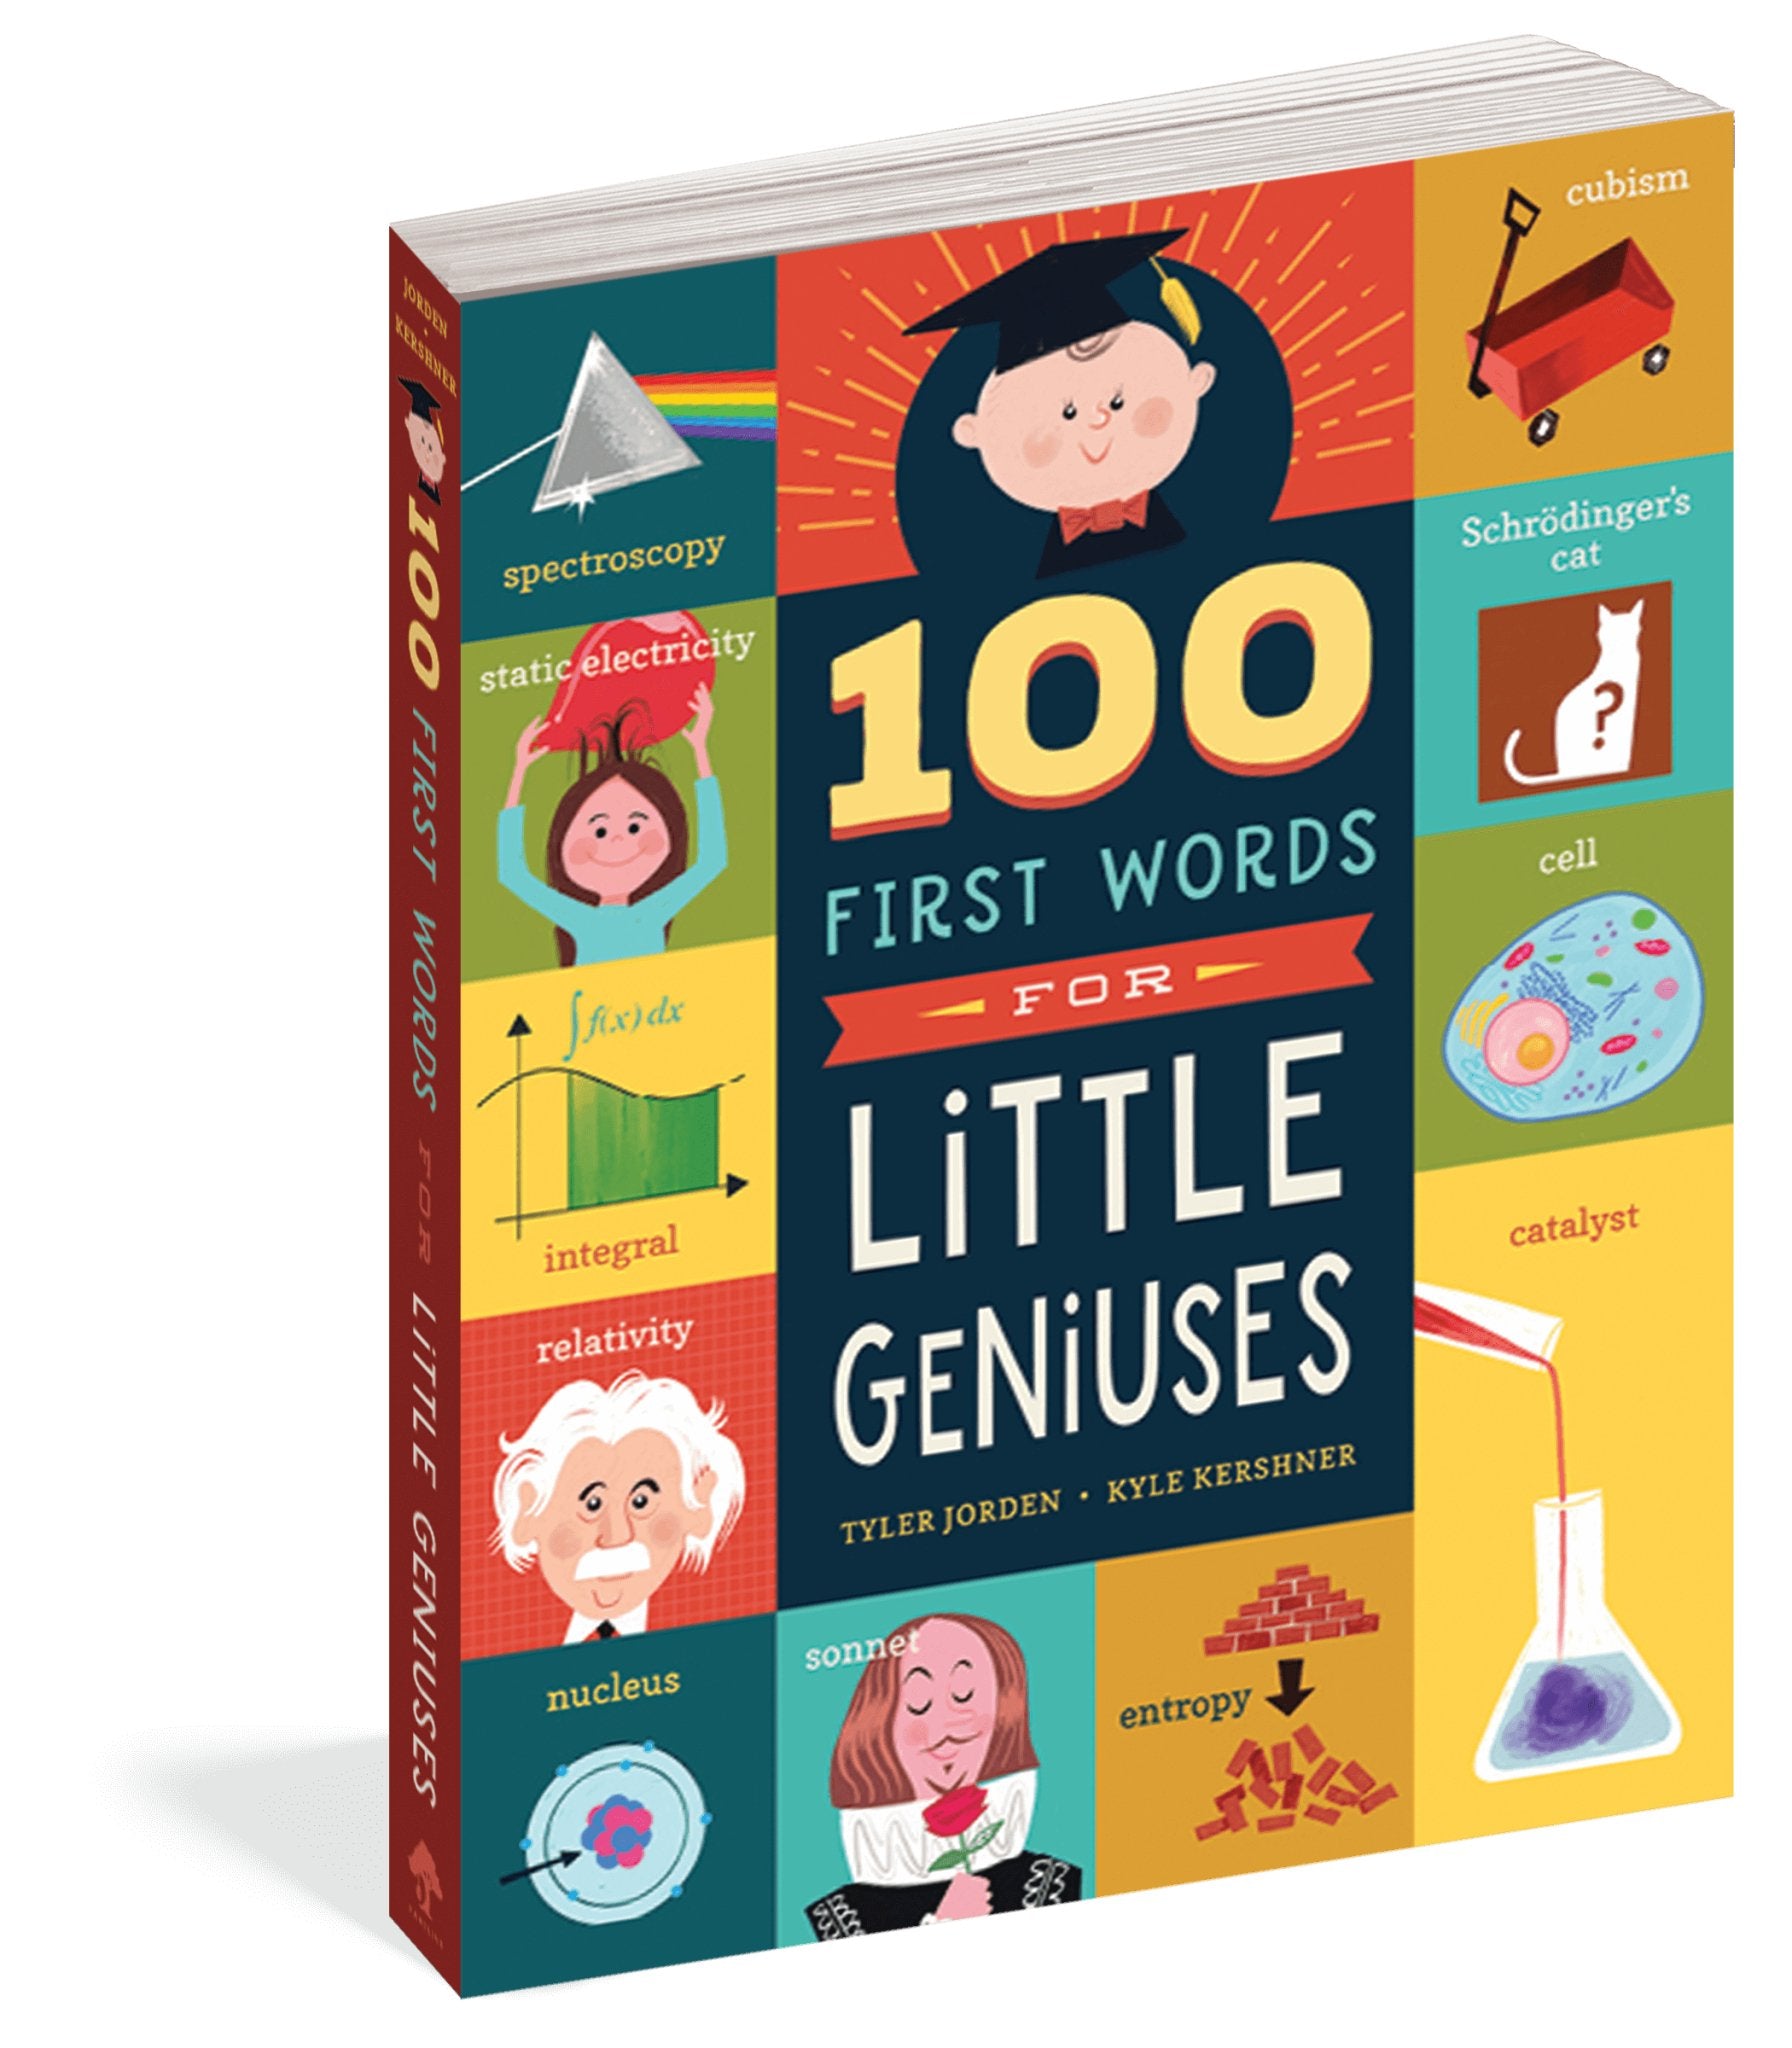 100 First Words for Little Geniuses - SuperMom Headquarters